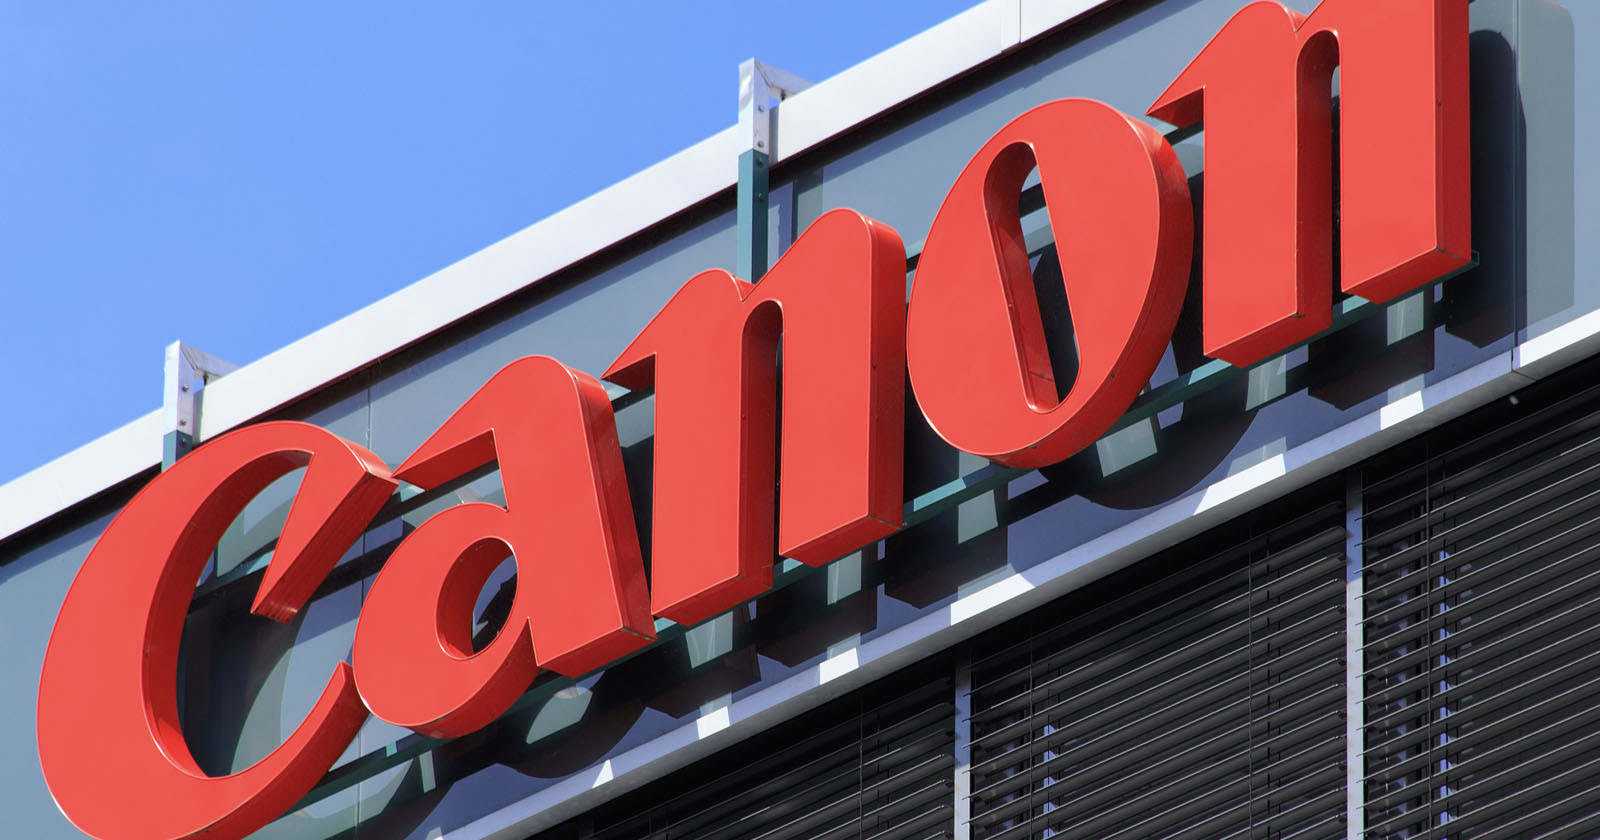 Viltrox Says Canon has Demanded They Stop Selling RF-Mount Lenses